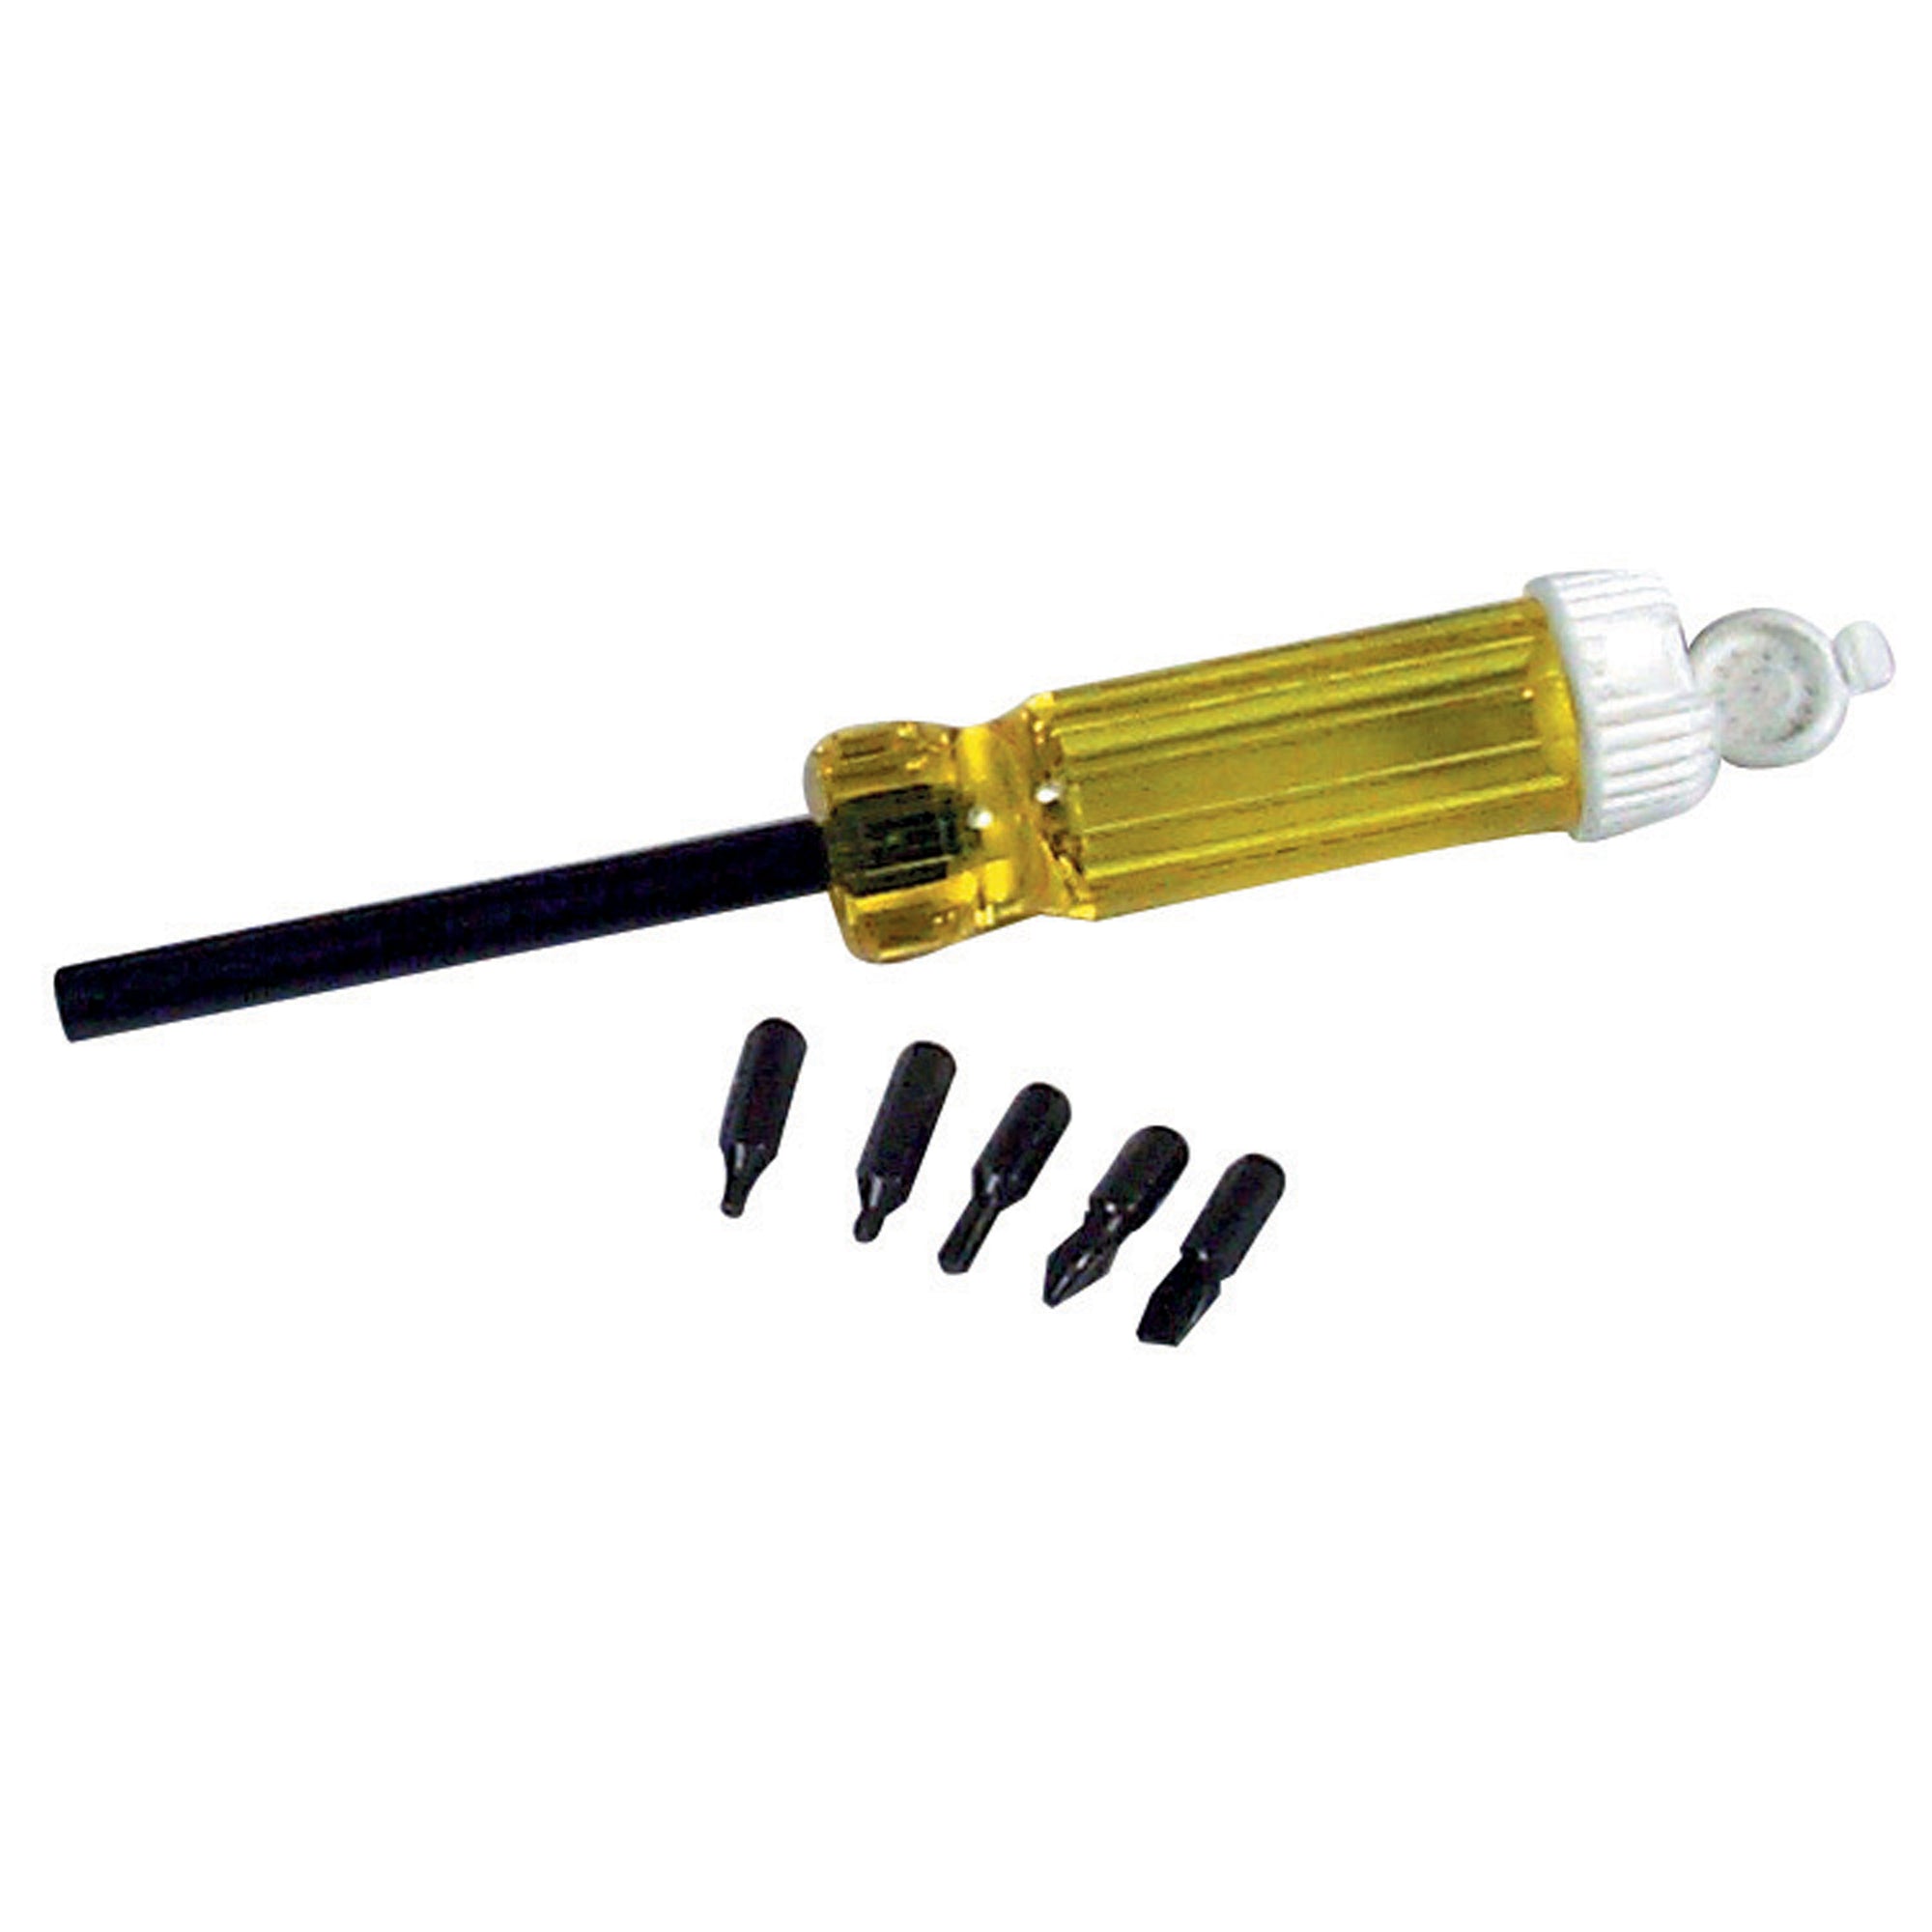 AP Products 009-RVM5IN1A 5-In-1 Screwdriver